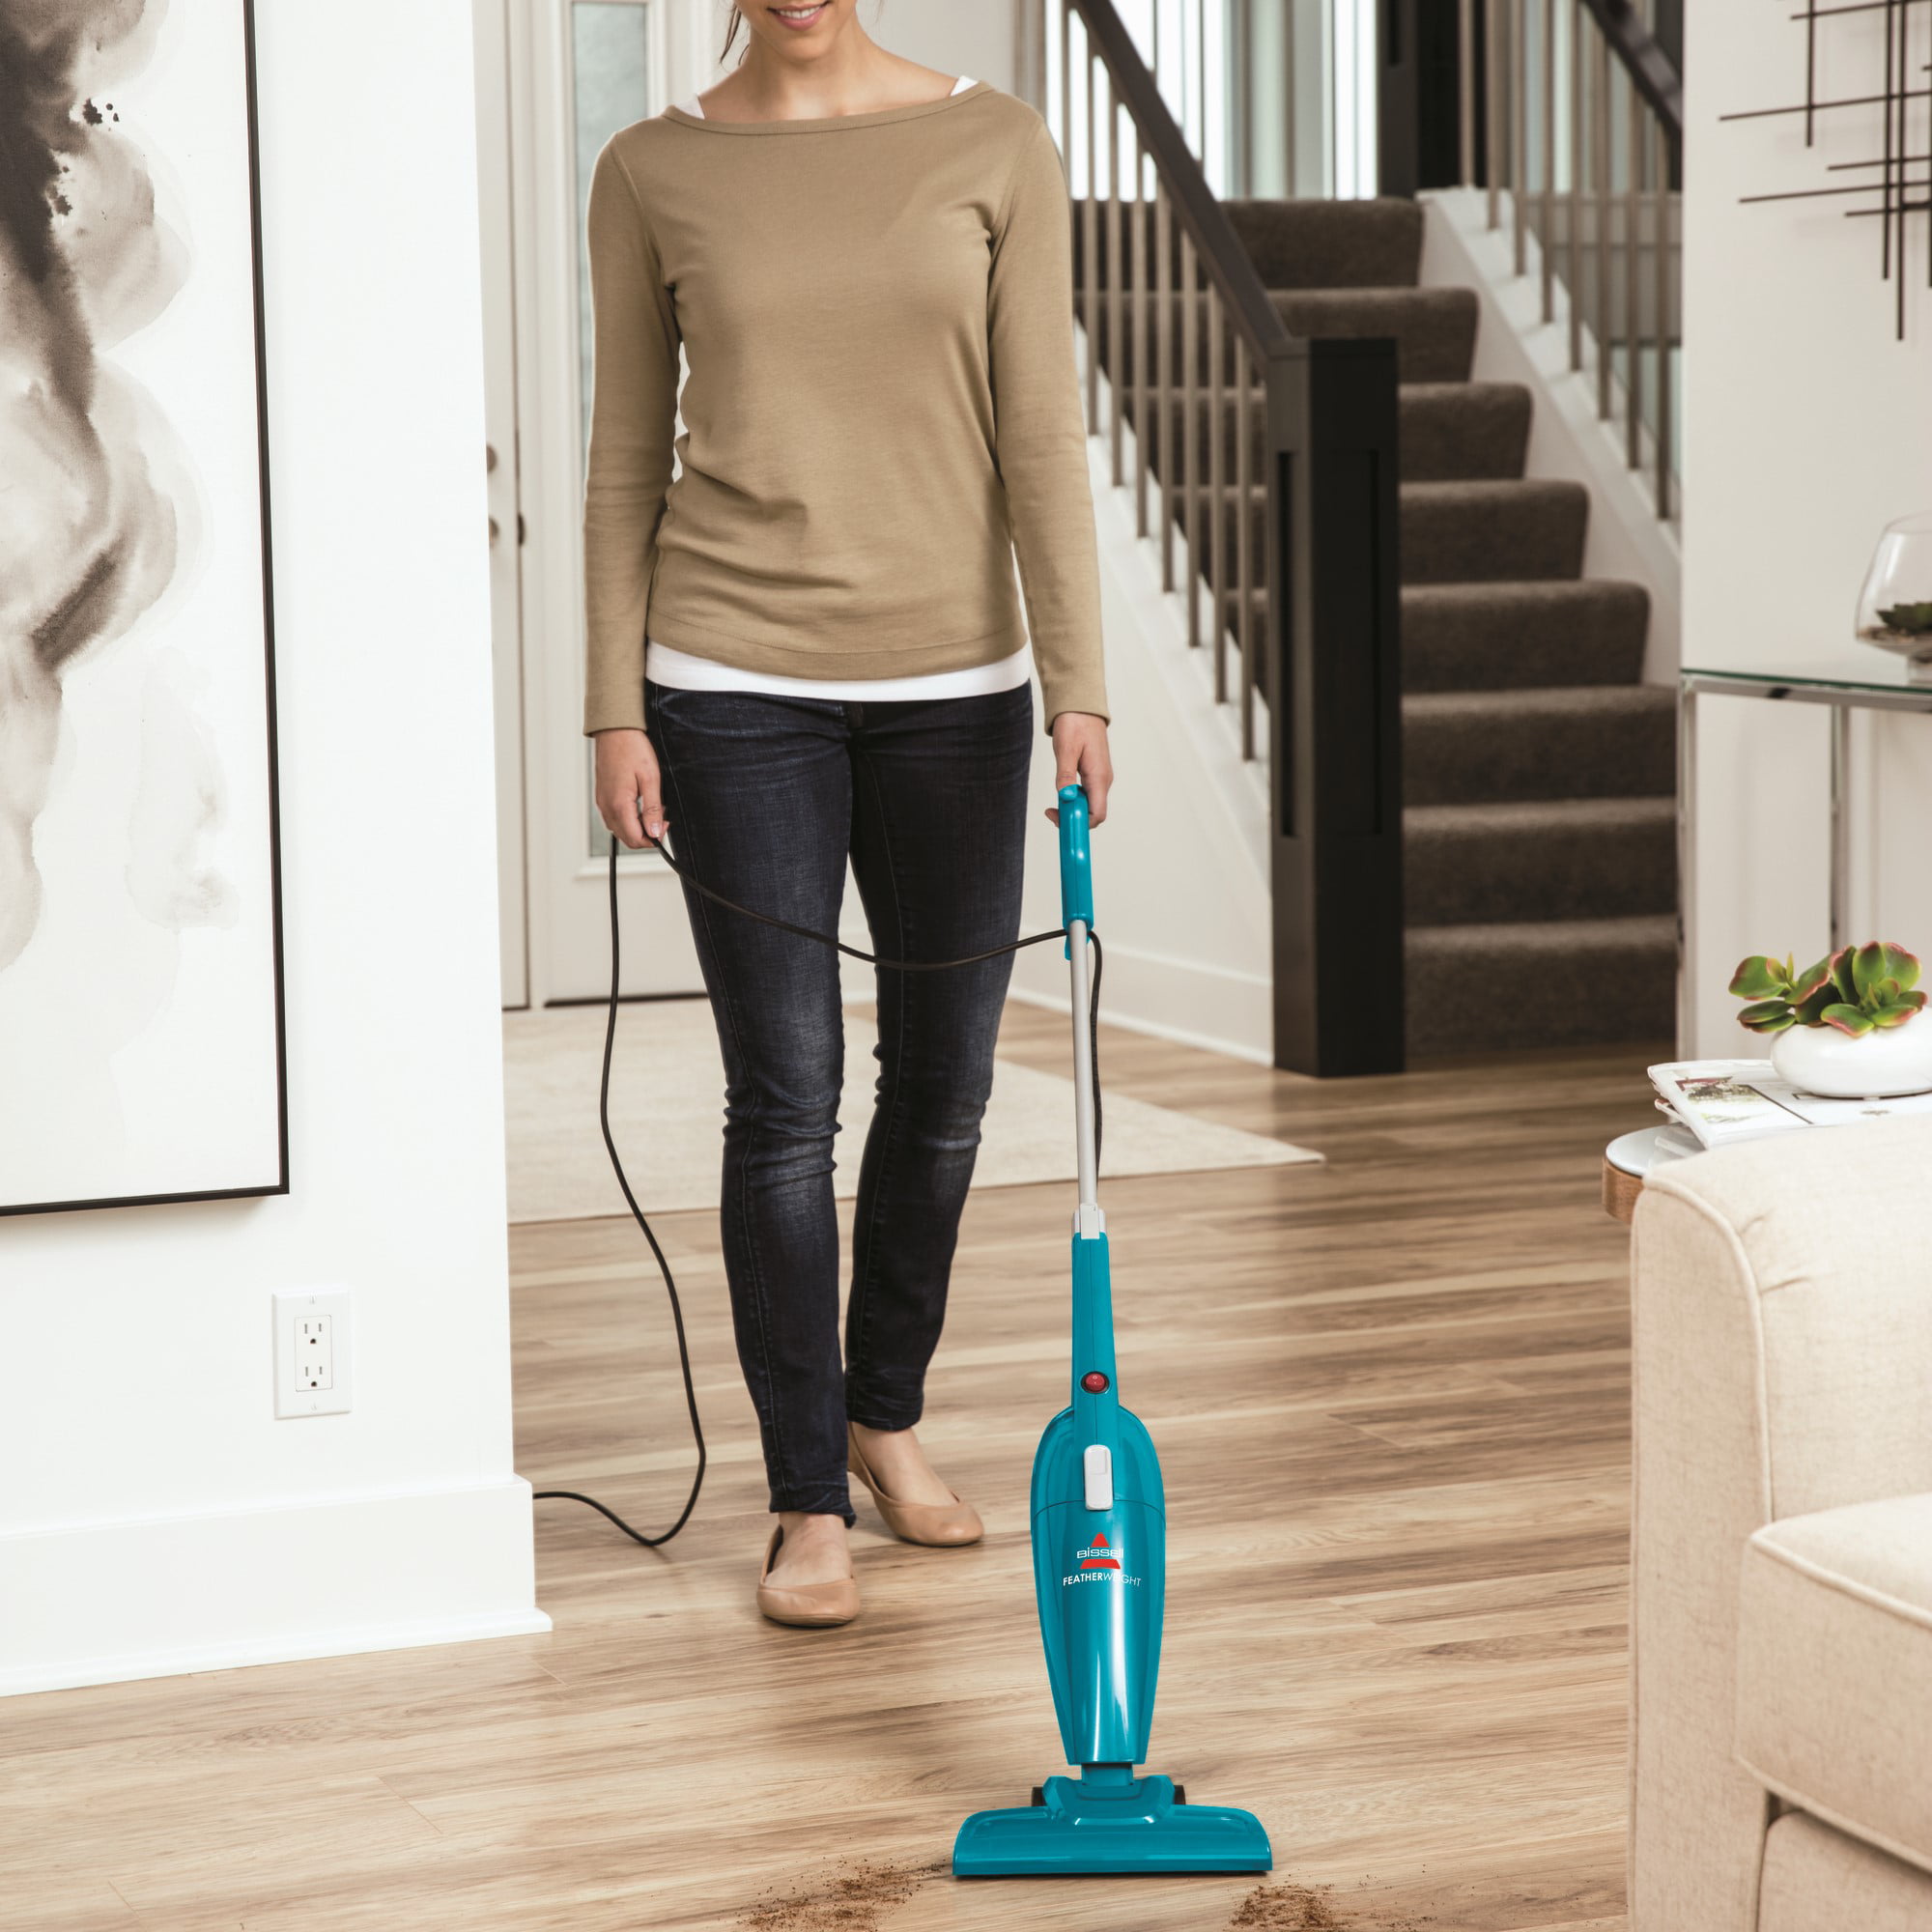 BISSELL Featherweight Stick Lightweight Bagless Vacuum & Electric Broom in Teal, BSL2033 - 3